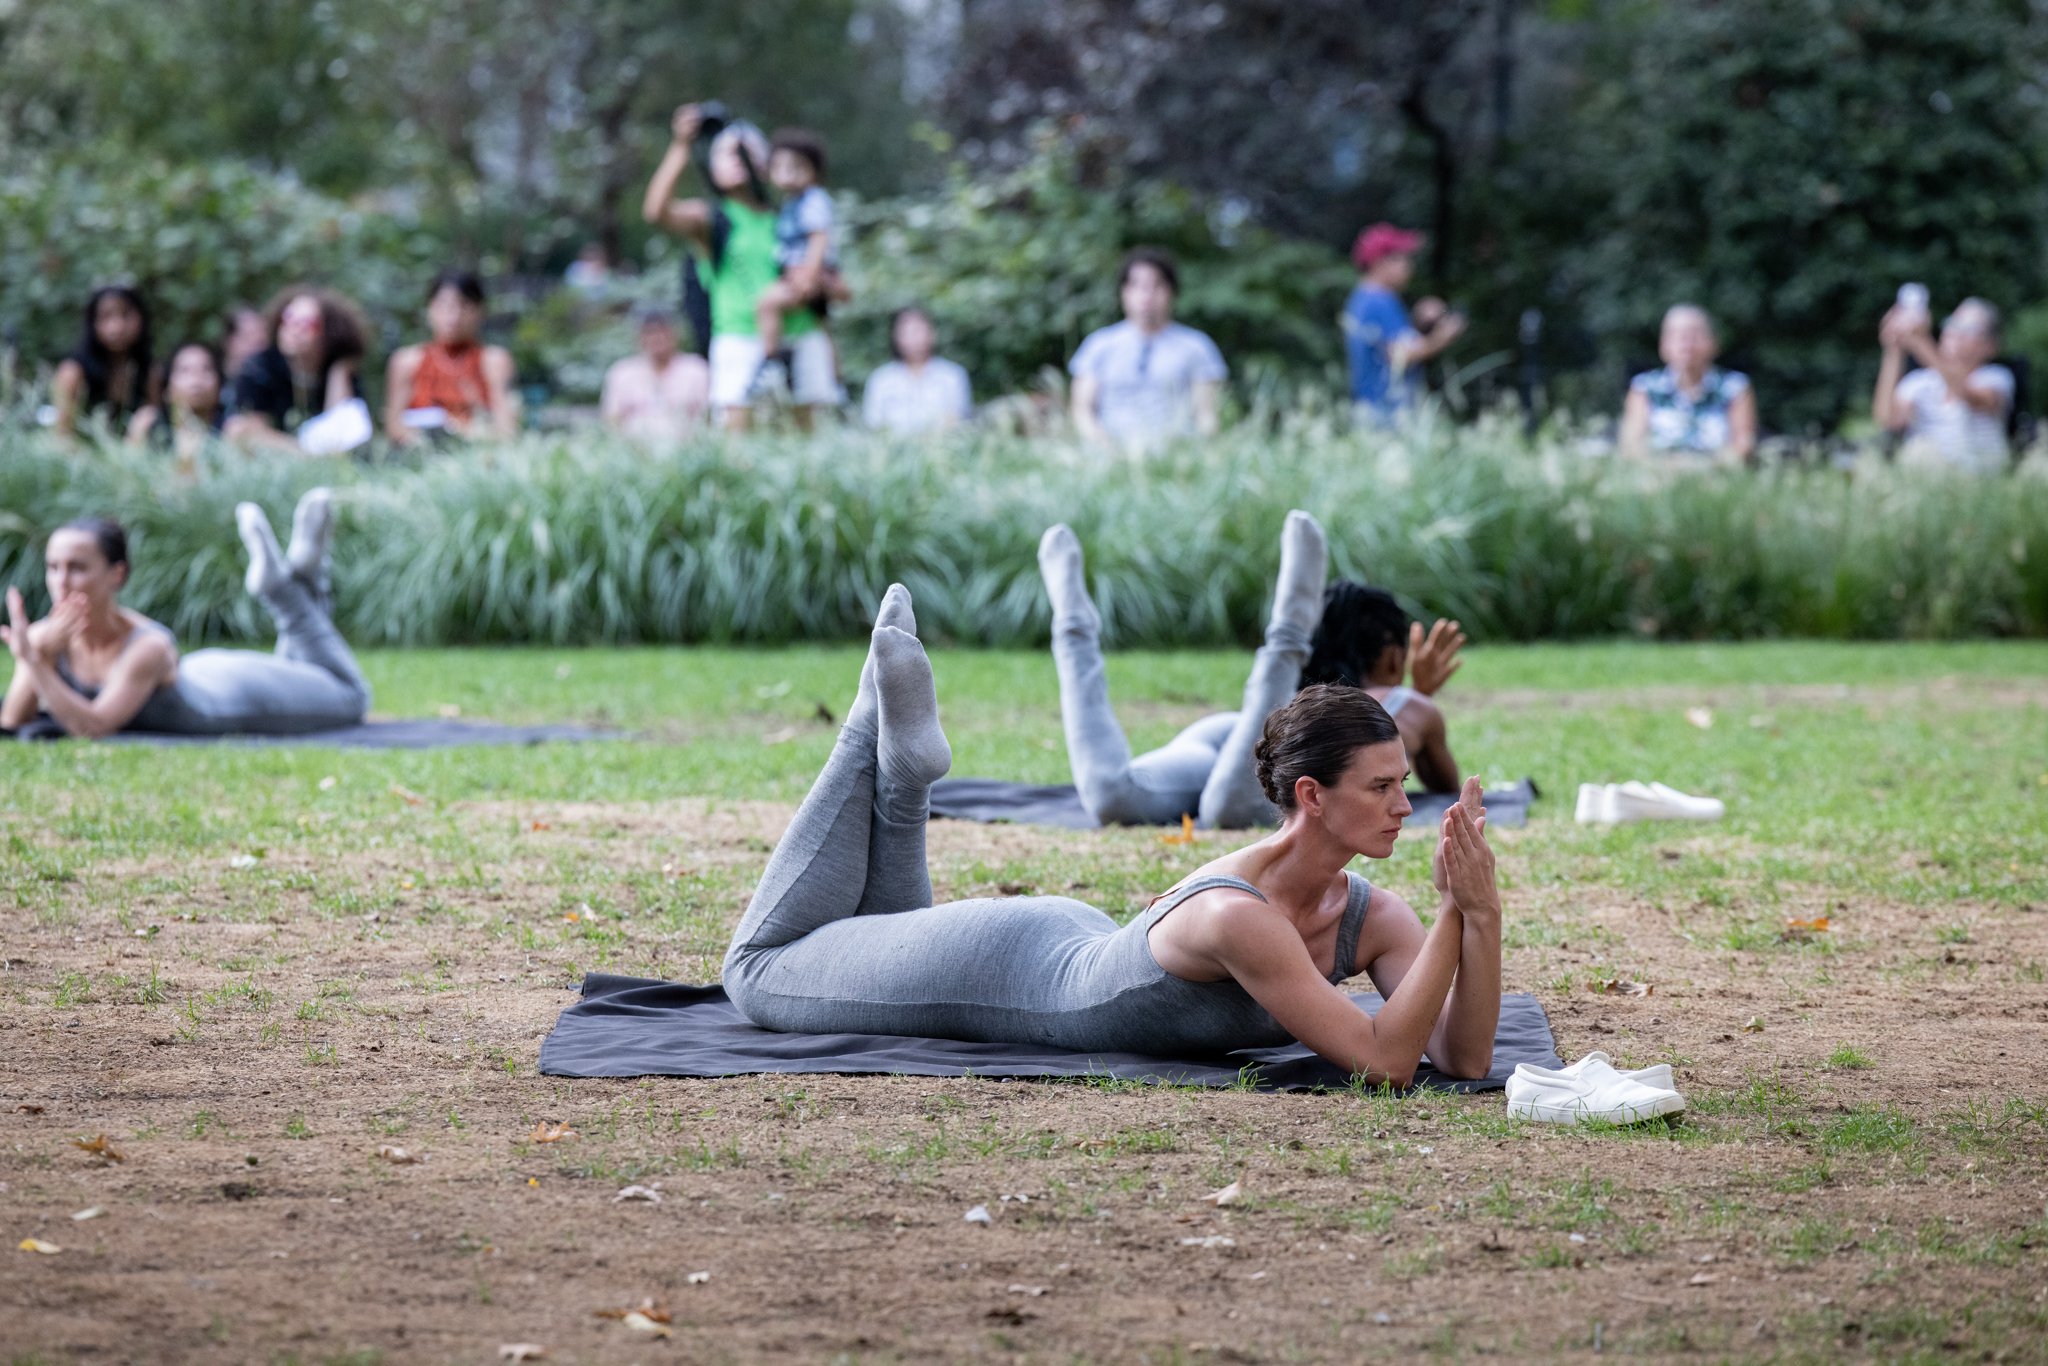  Cara McManus, Bria Bacon &amp; Caitlin Scranton in Beau Bree Rhee, Shadow of the Sea, 2022. Performance view, Madison Square Park, September 21, 2022. Presented by The Kitchen in partnership with Madison Square Park Conservancy. Artwork pictured: Cr